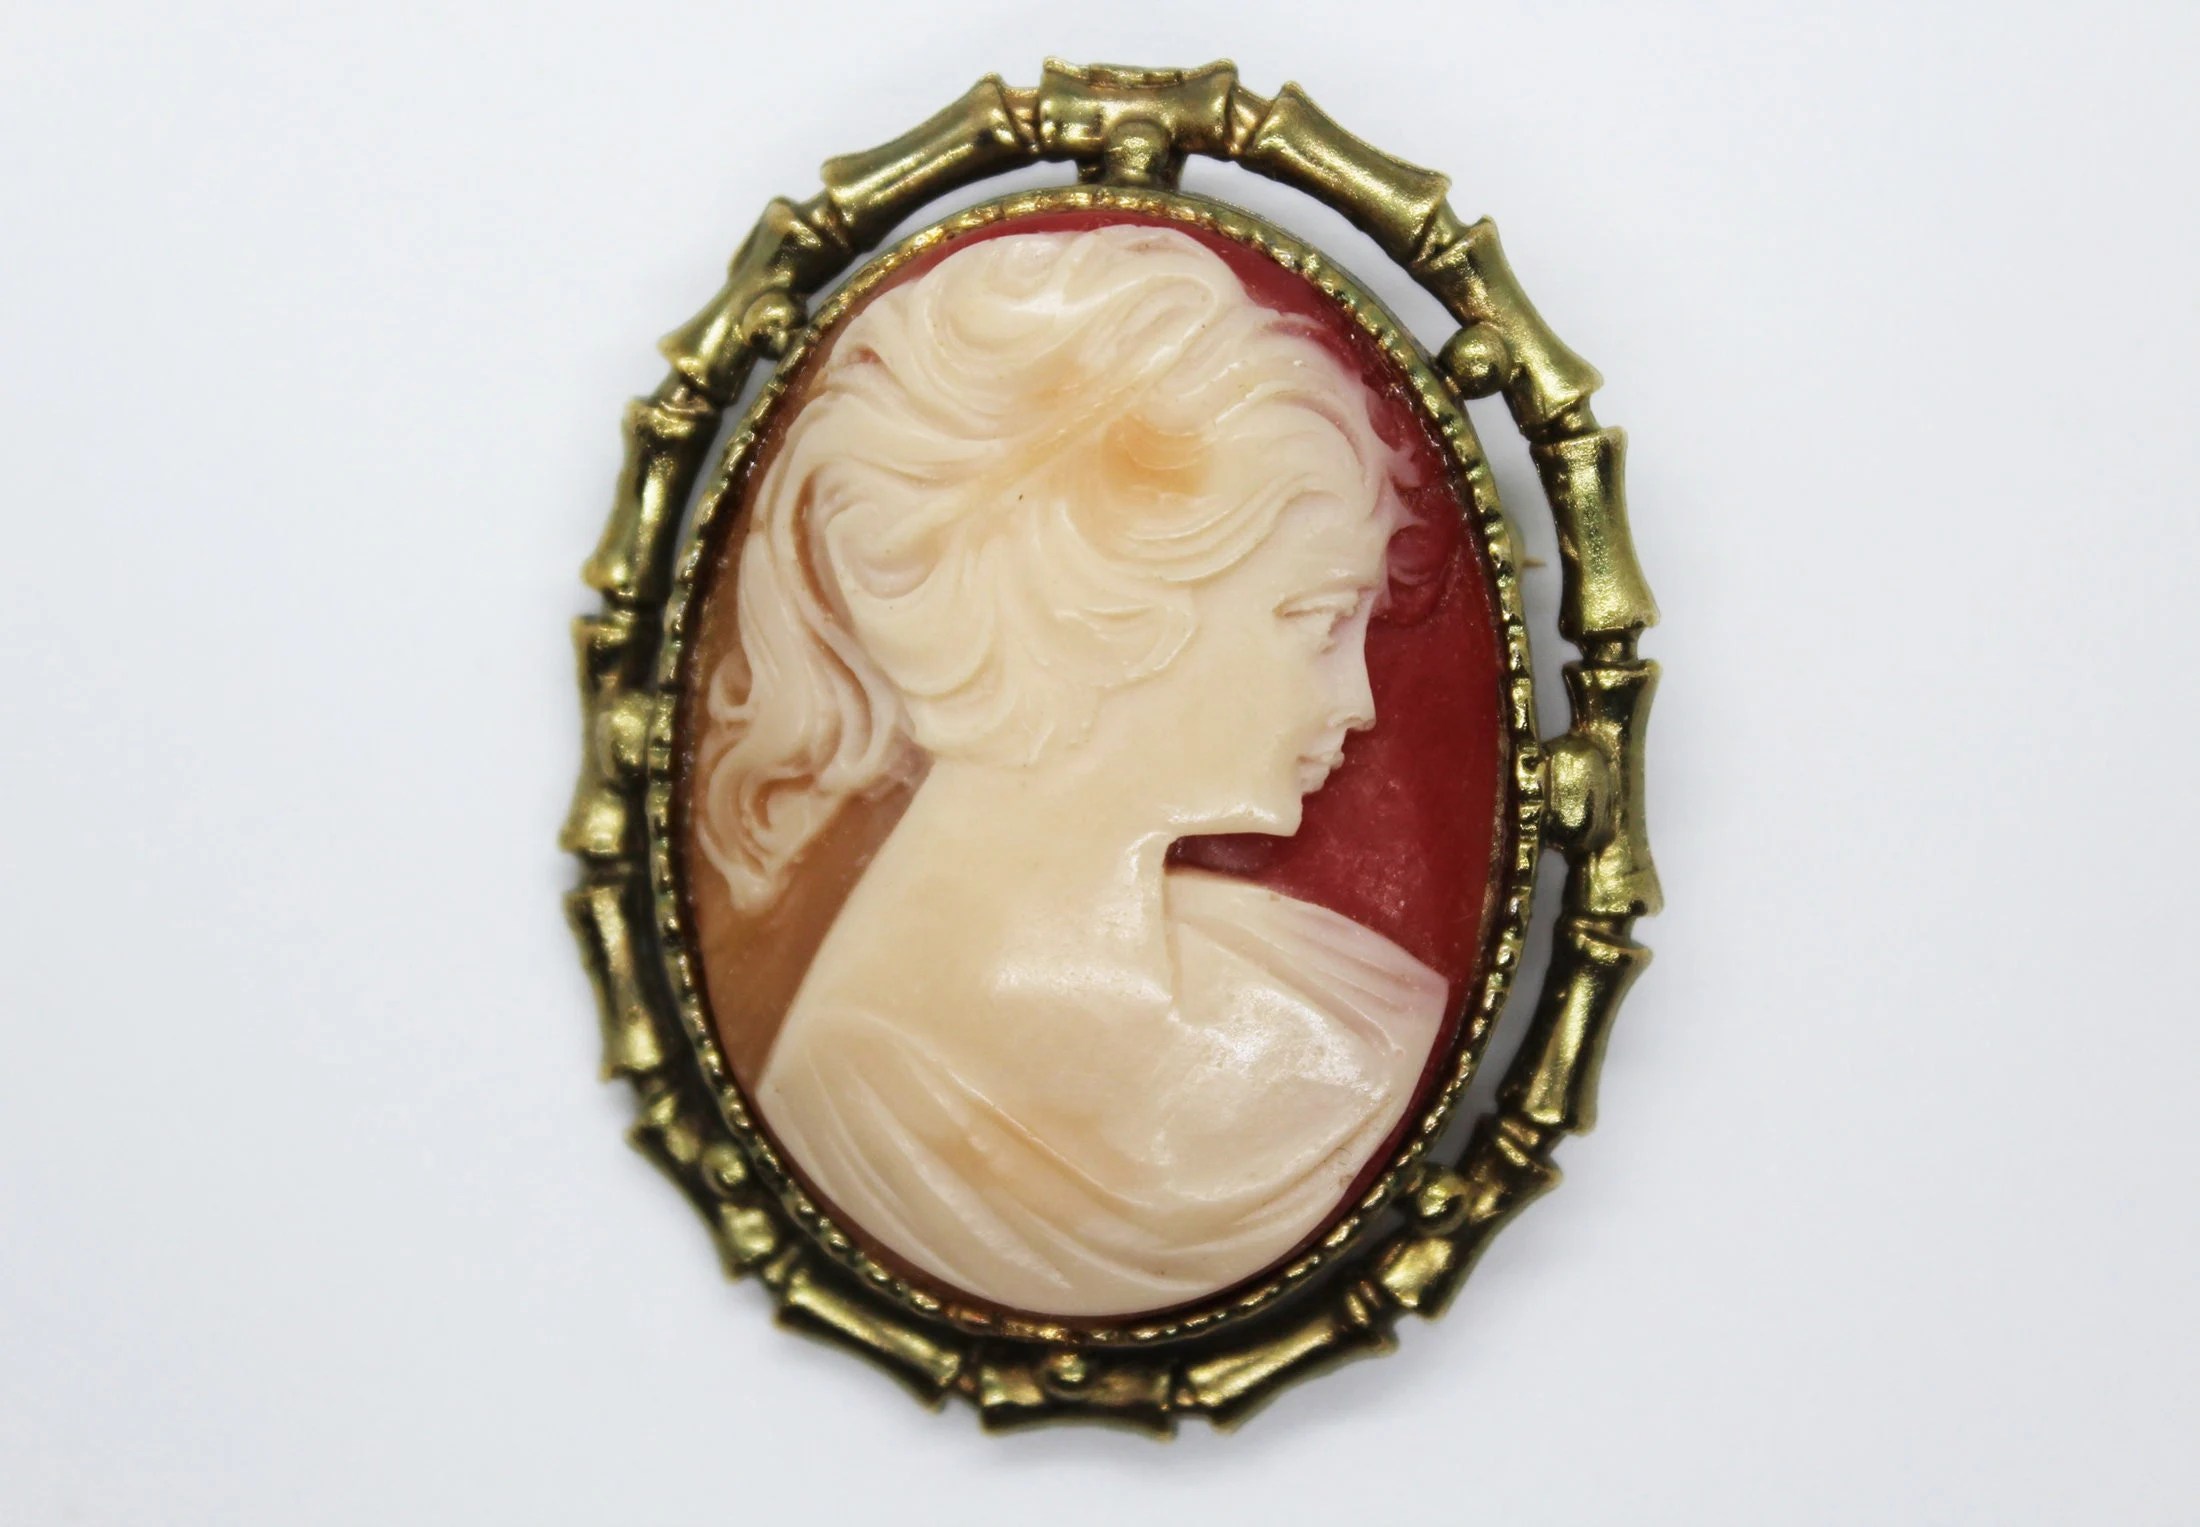 1960s Cameo Brooch "Pony Tail Girl" in Gold Tone Frame - Vintage, Retro, Victorian Revival, Mid Century, Costume Jewelry